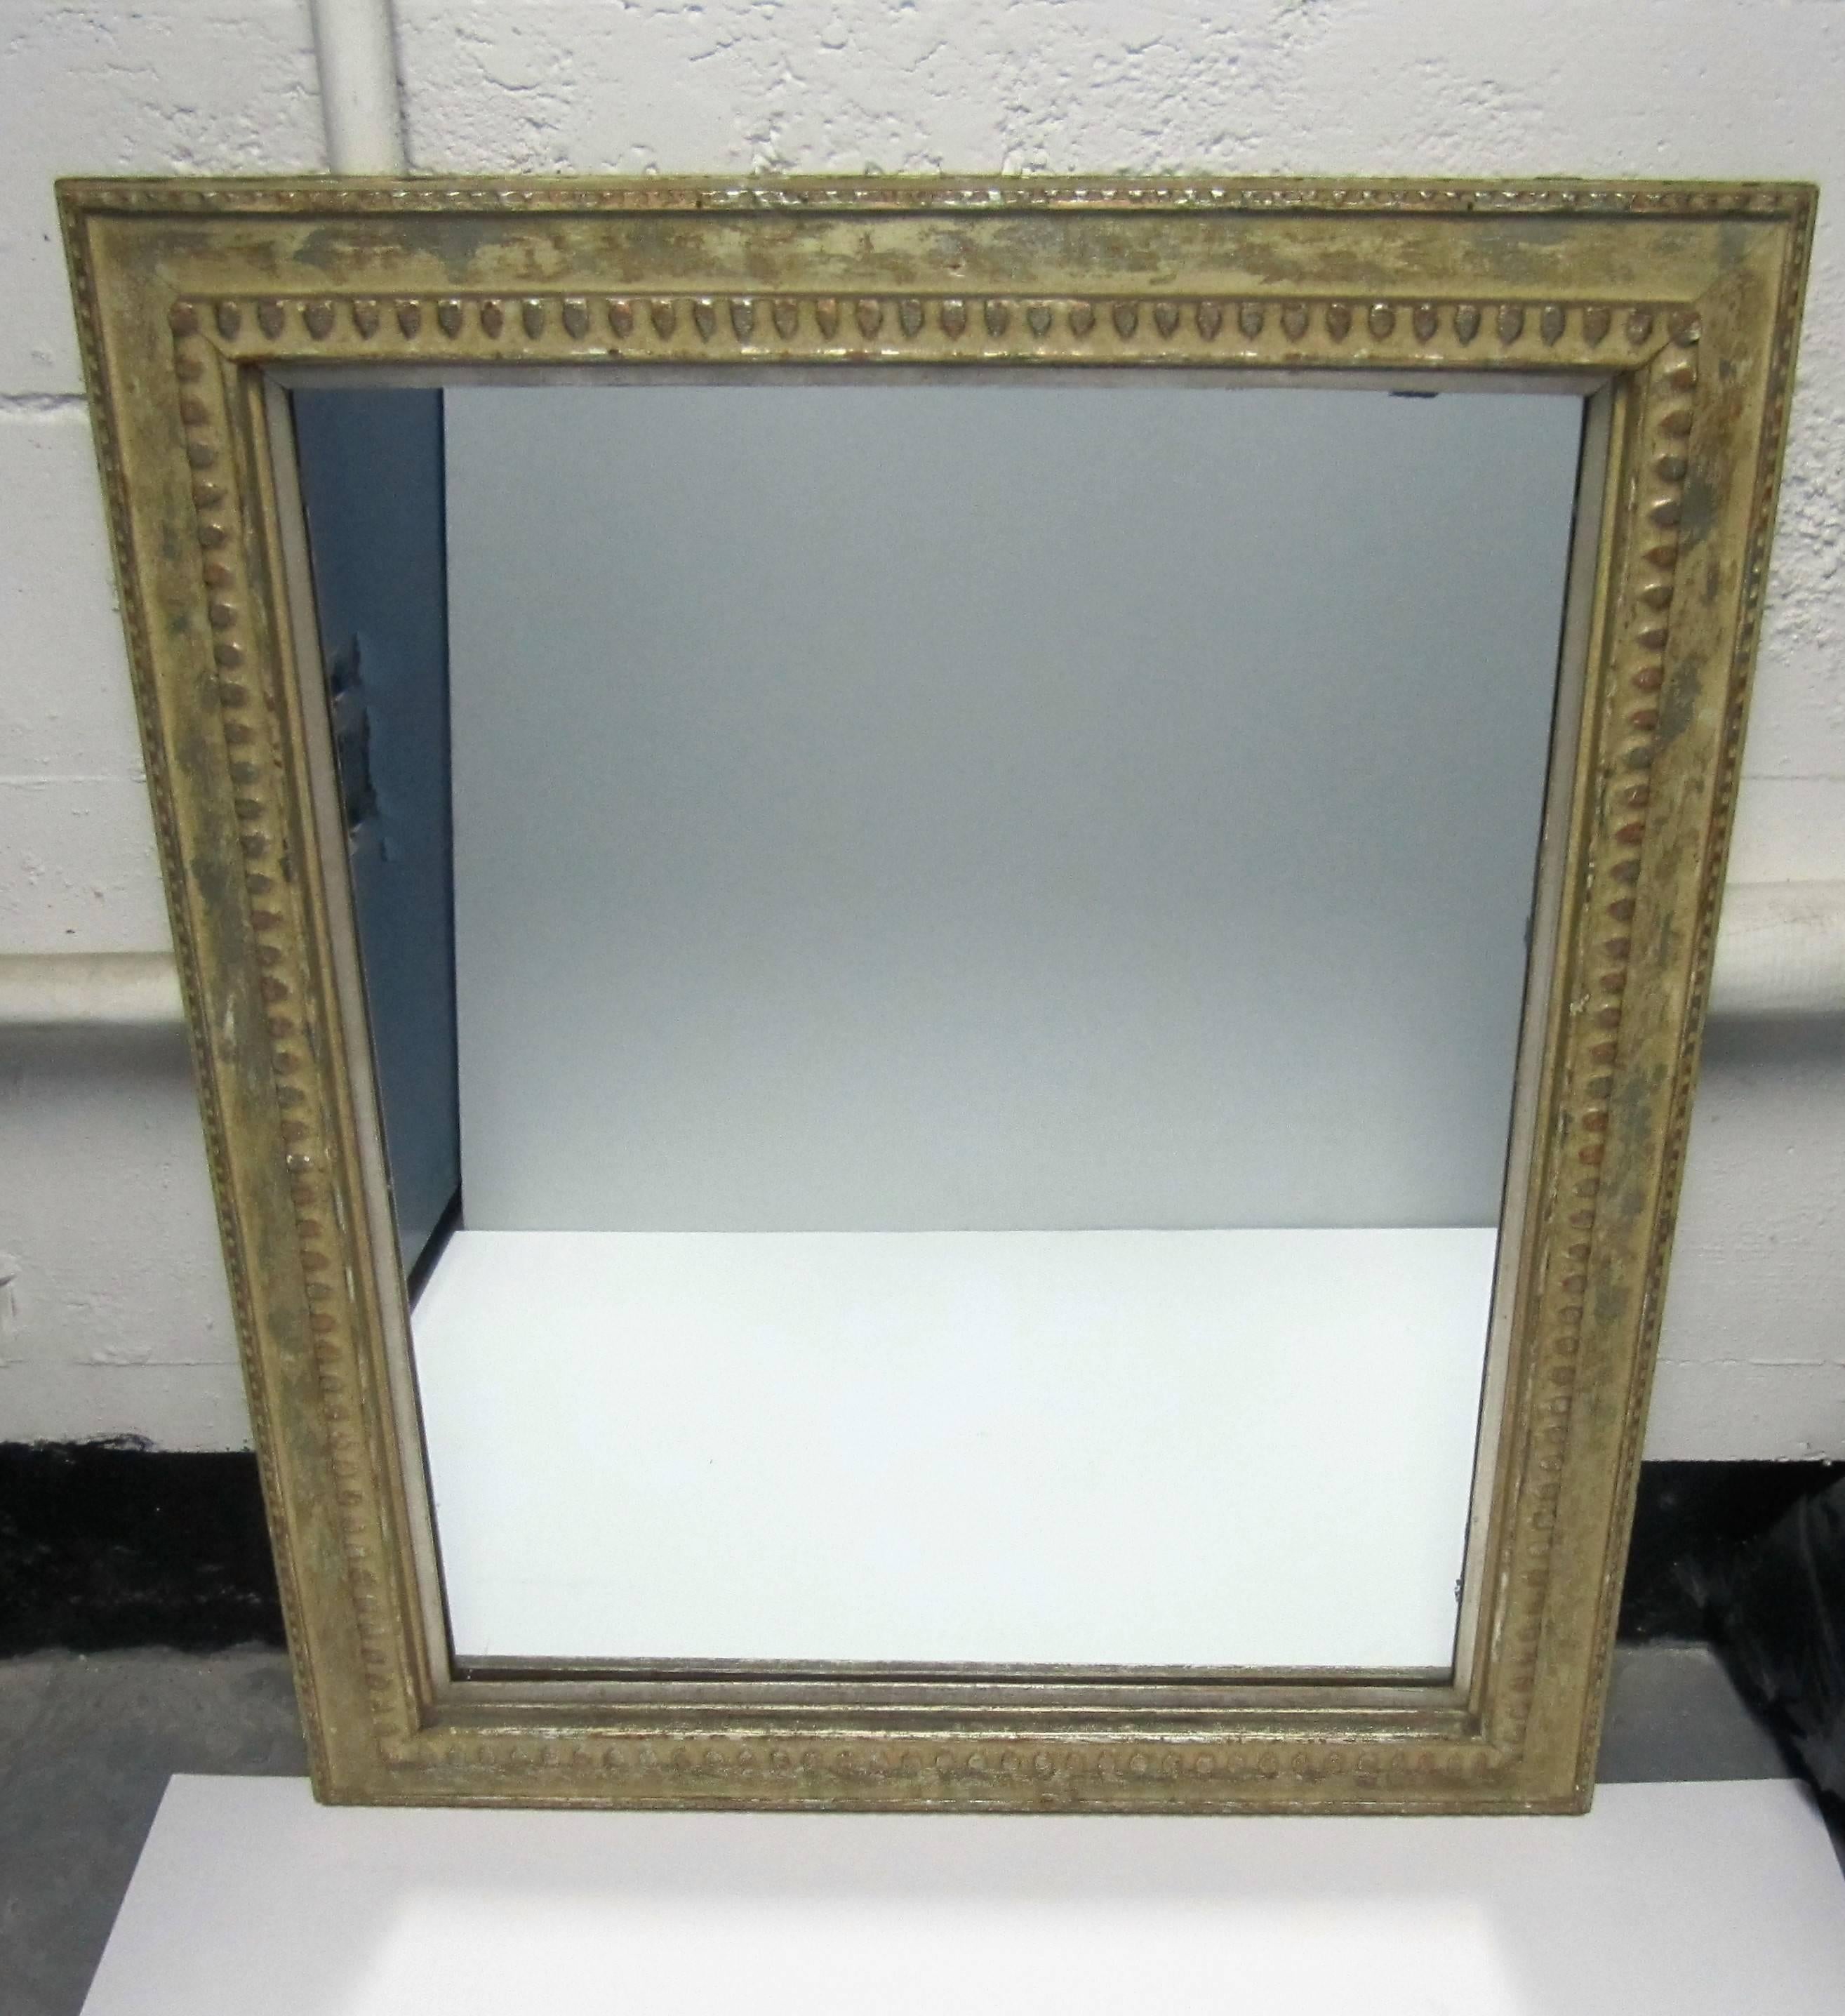 A beautiful vintage wood and metal distressed framed wall mirror. Frame is a creamy antique white - antique beige color with hints of silver (the metal) showing through; Frame has beautiful details/design; there is also a second frame, a small thin